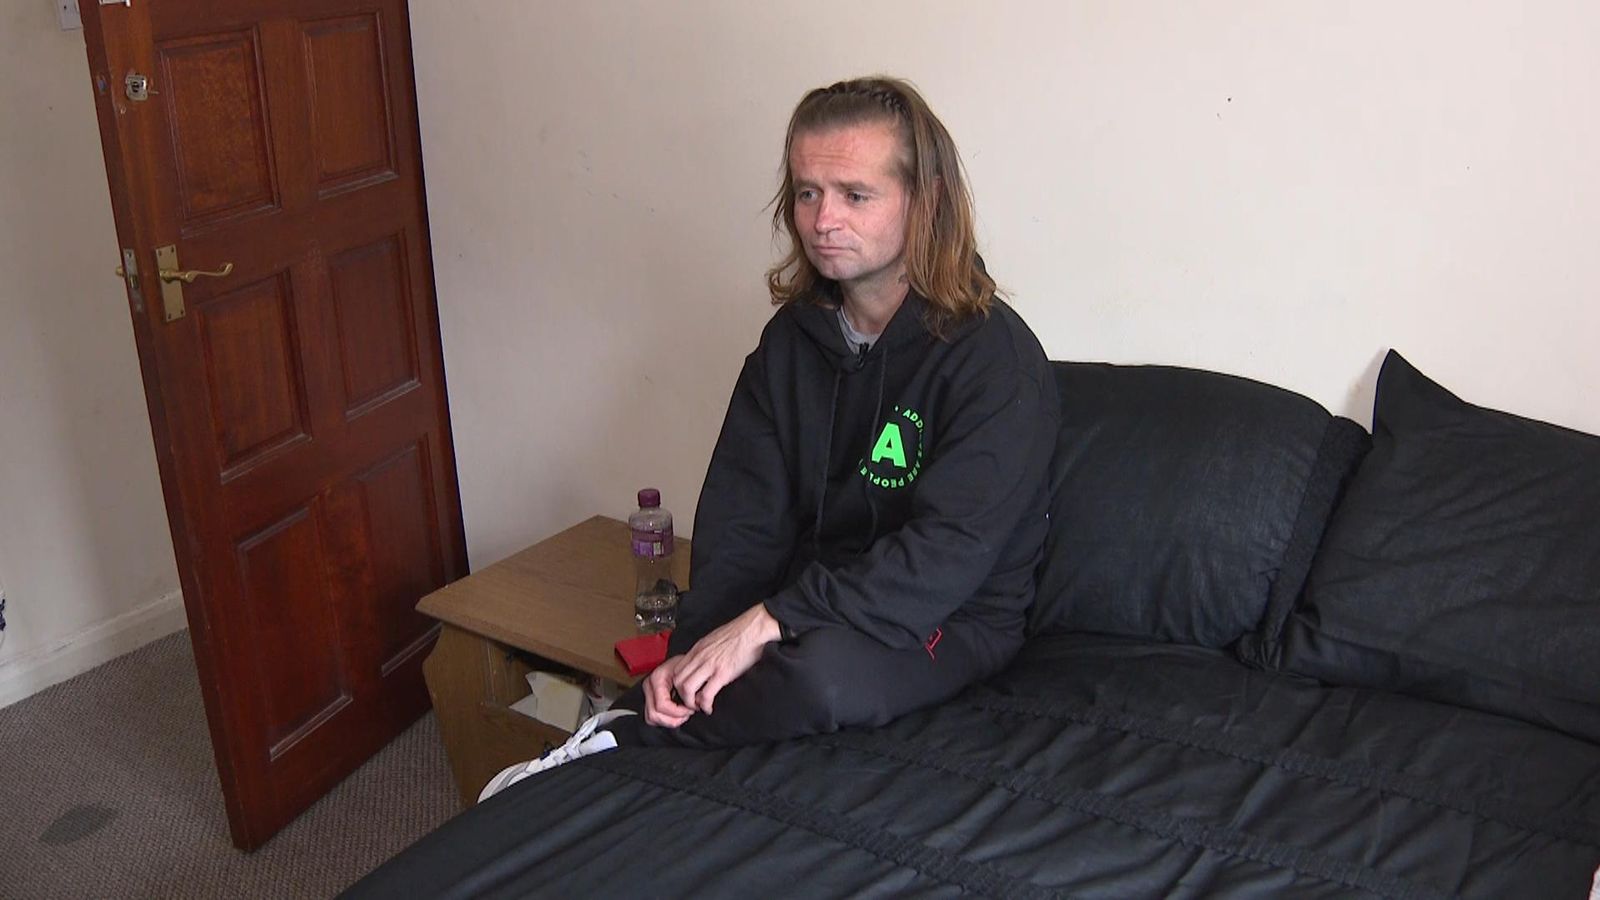 Drug addict who featured in Sky News investigation given second chance by rehabilitation charity